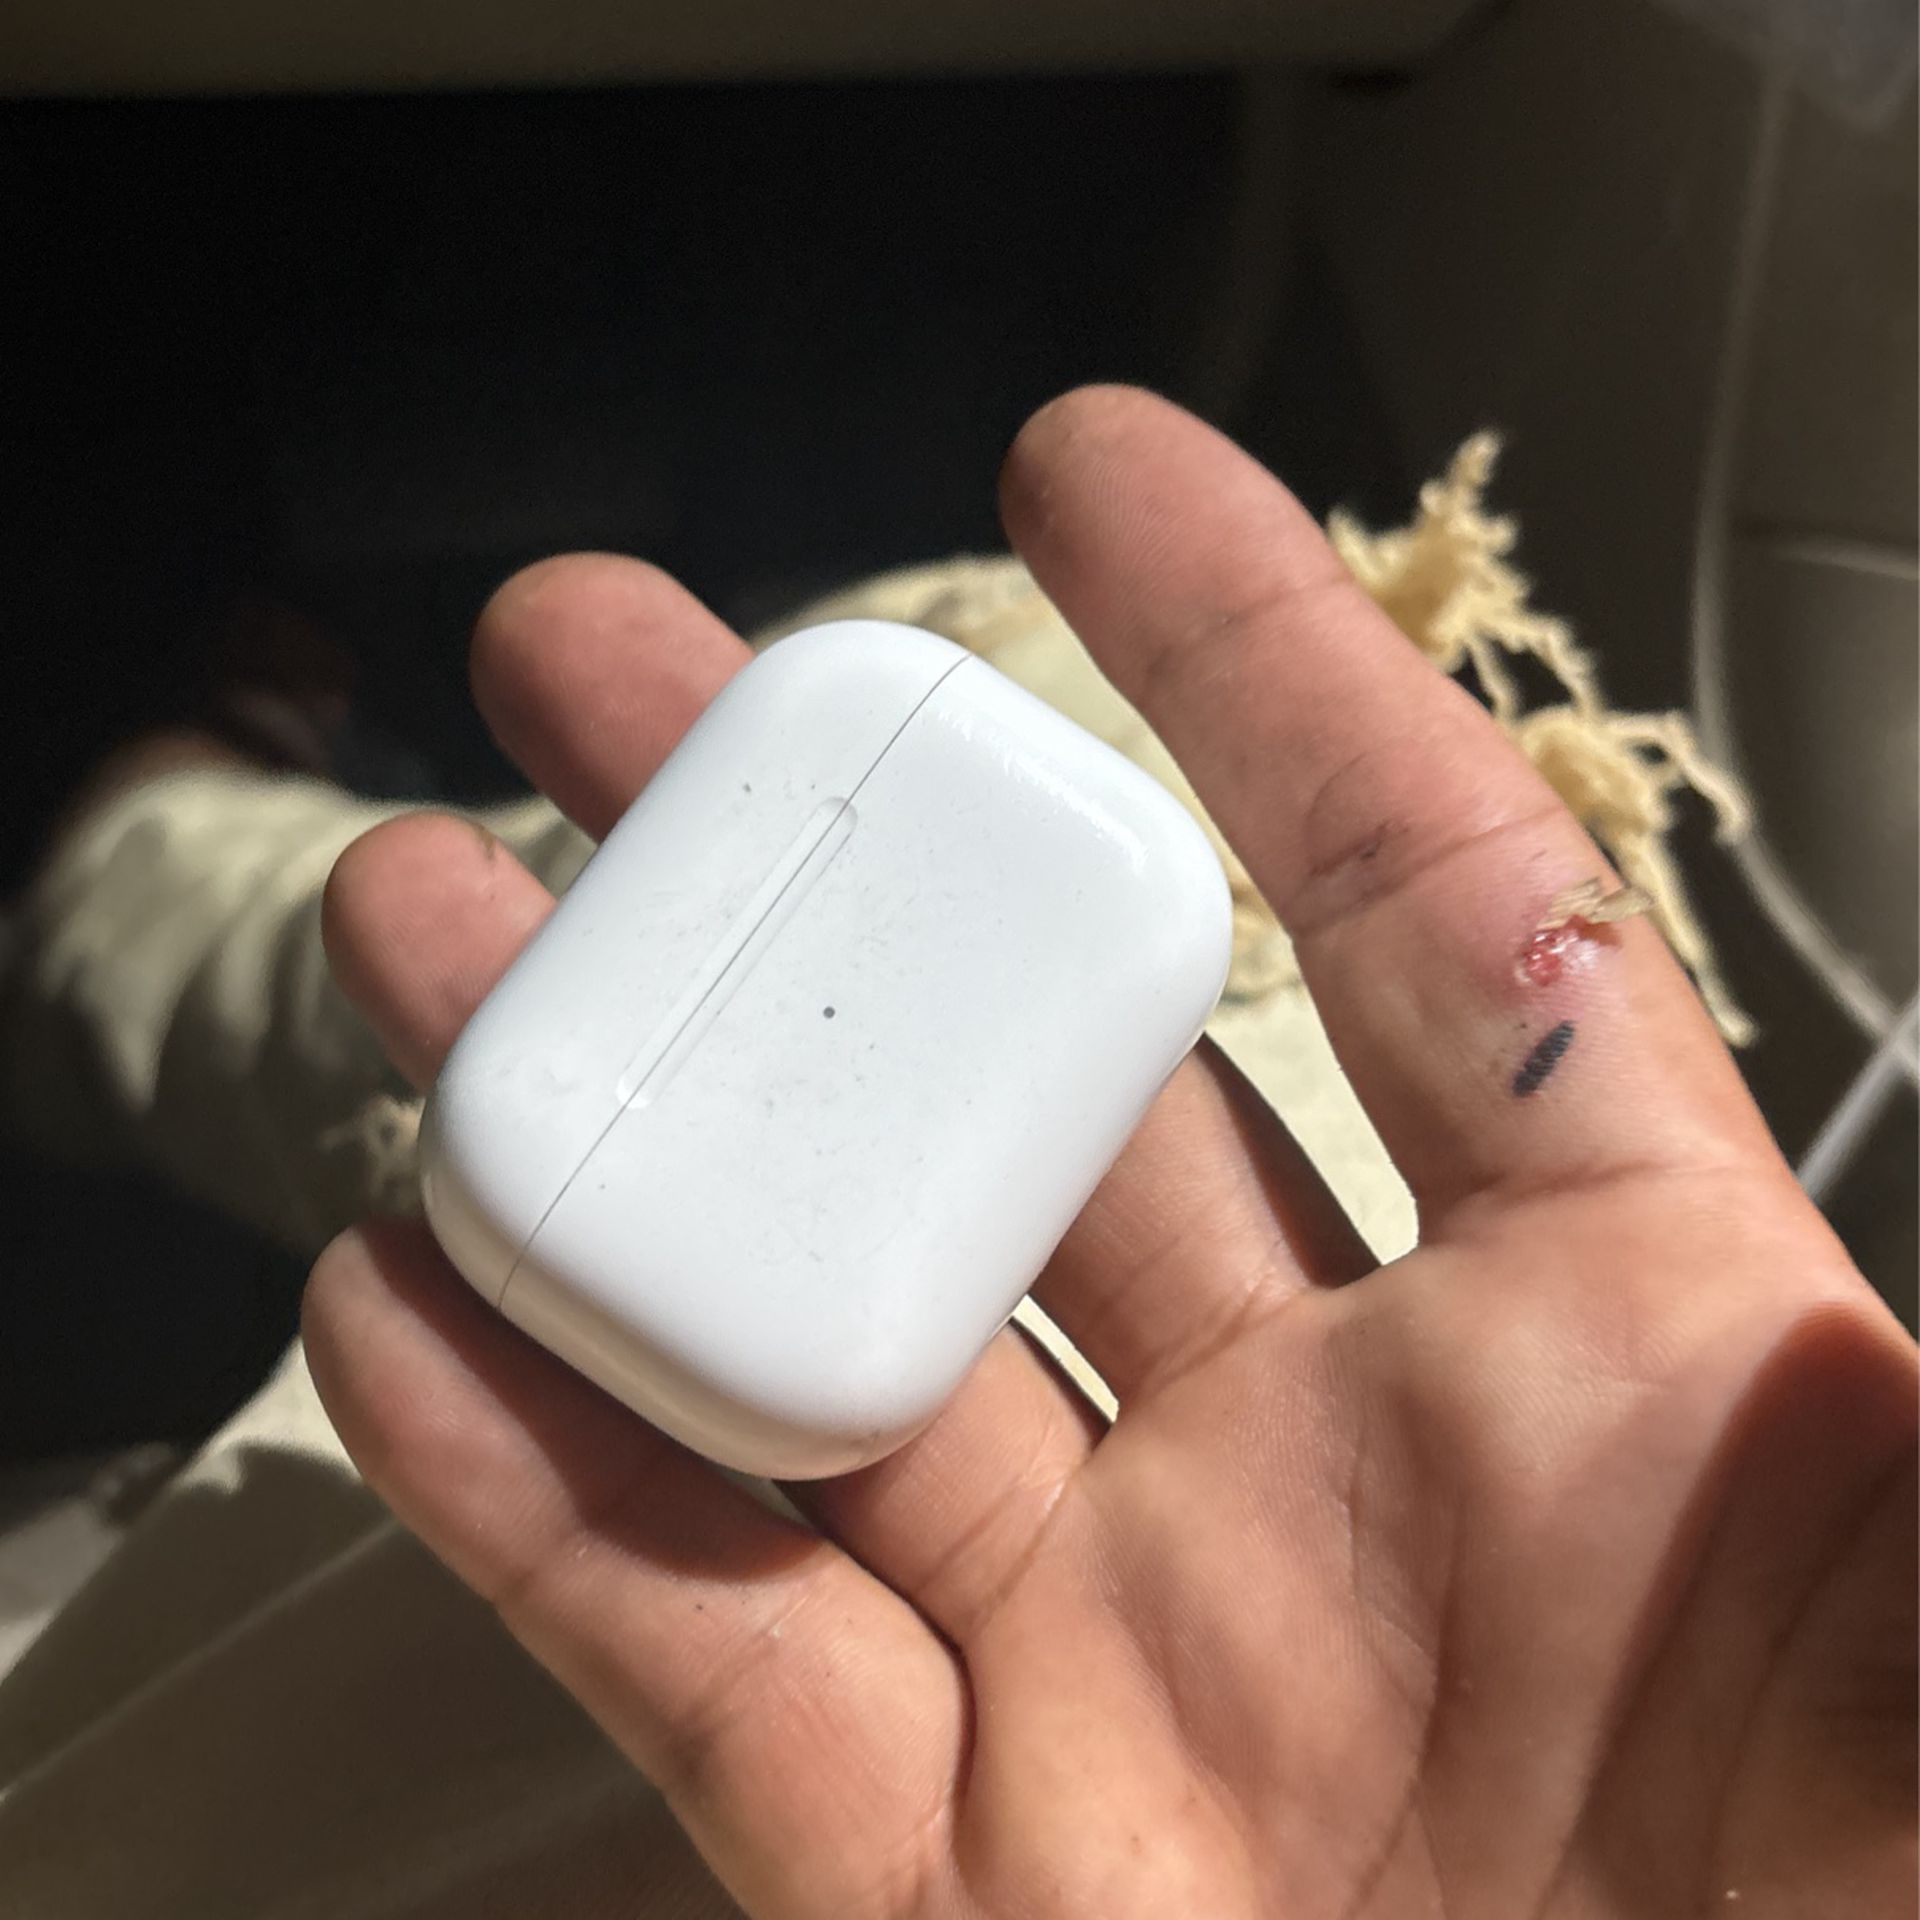 Air Pods Pro